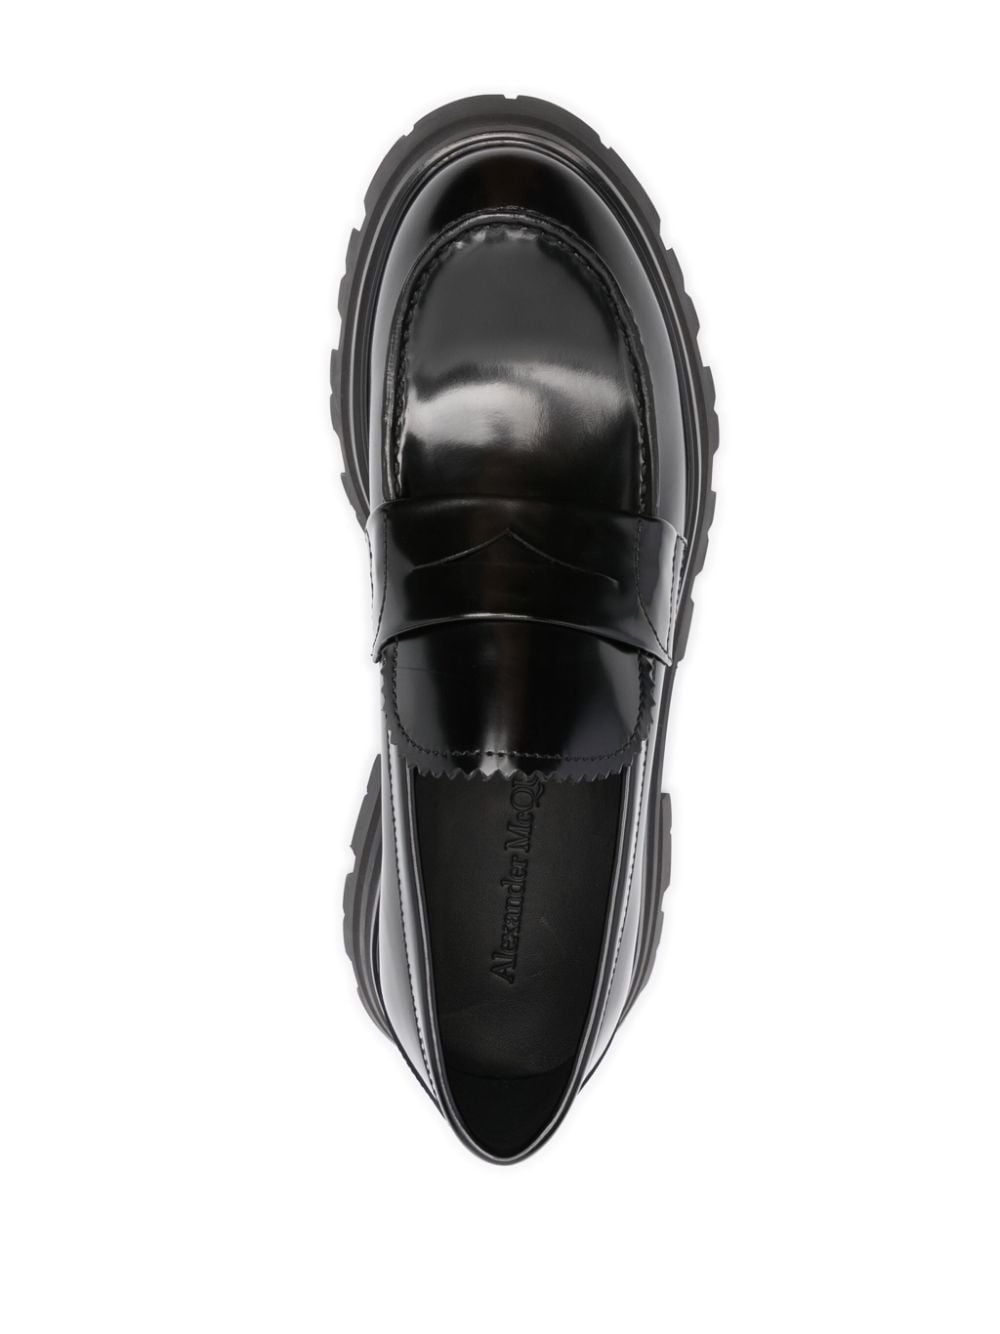 Wander leather loafers - 4